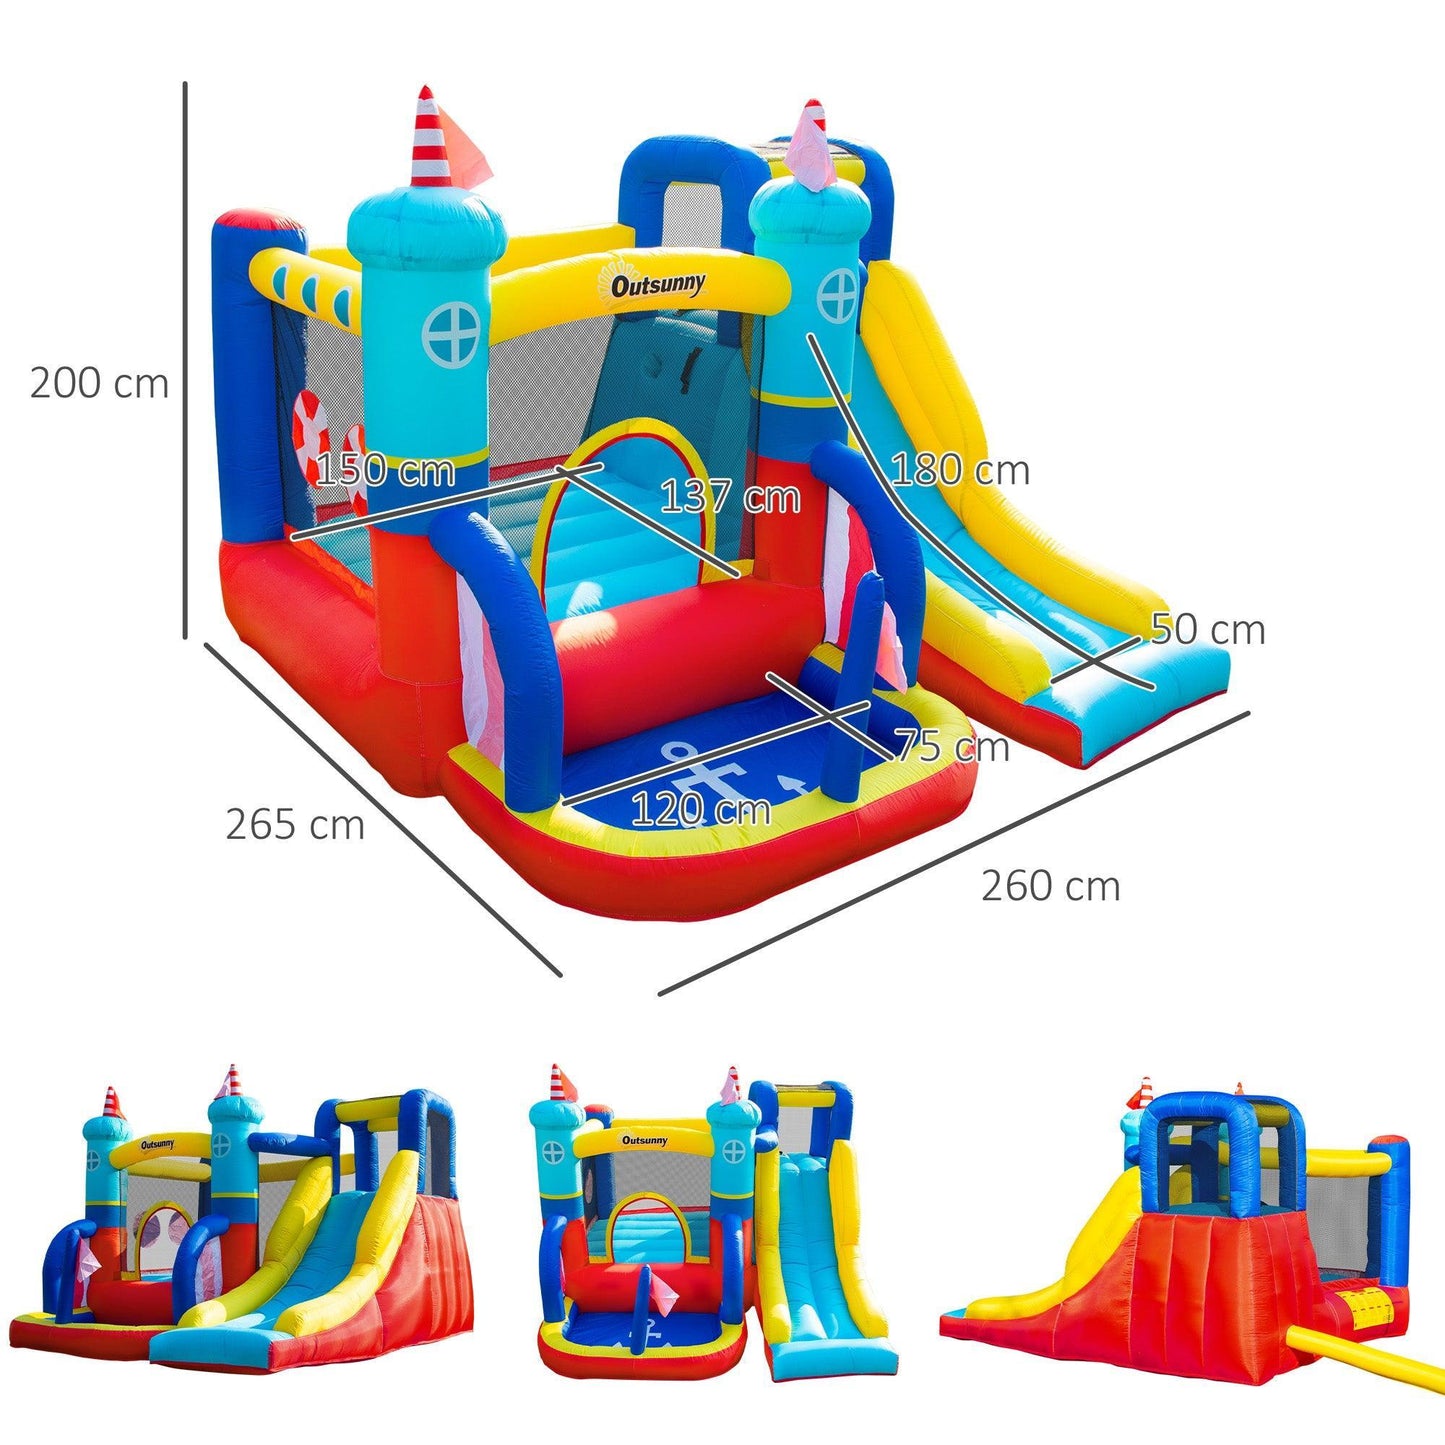 Outsunny Kids Bounce Castle Sailboat Inflatable with Slide & Pool - ALL4U RETAILER LTD